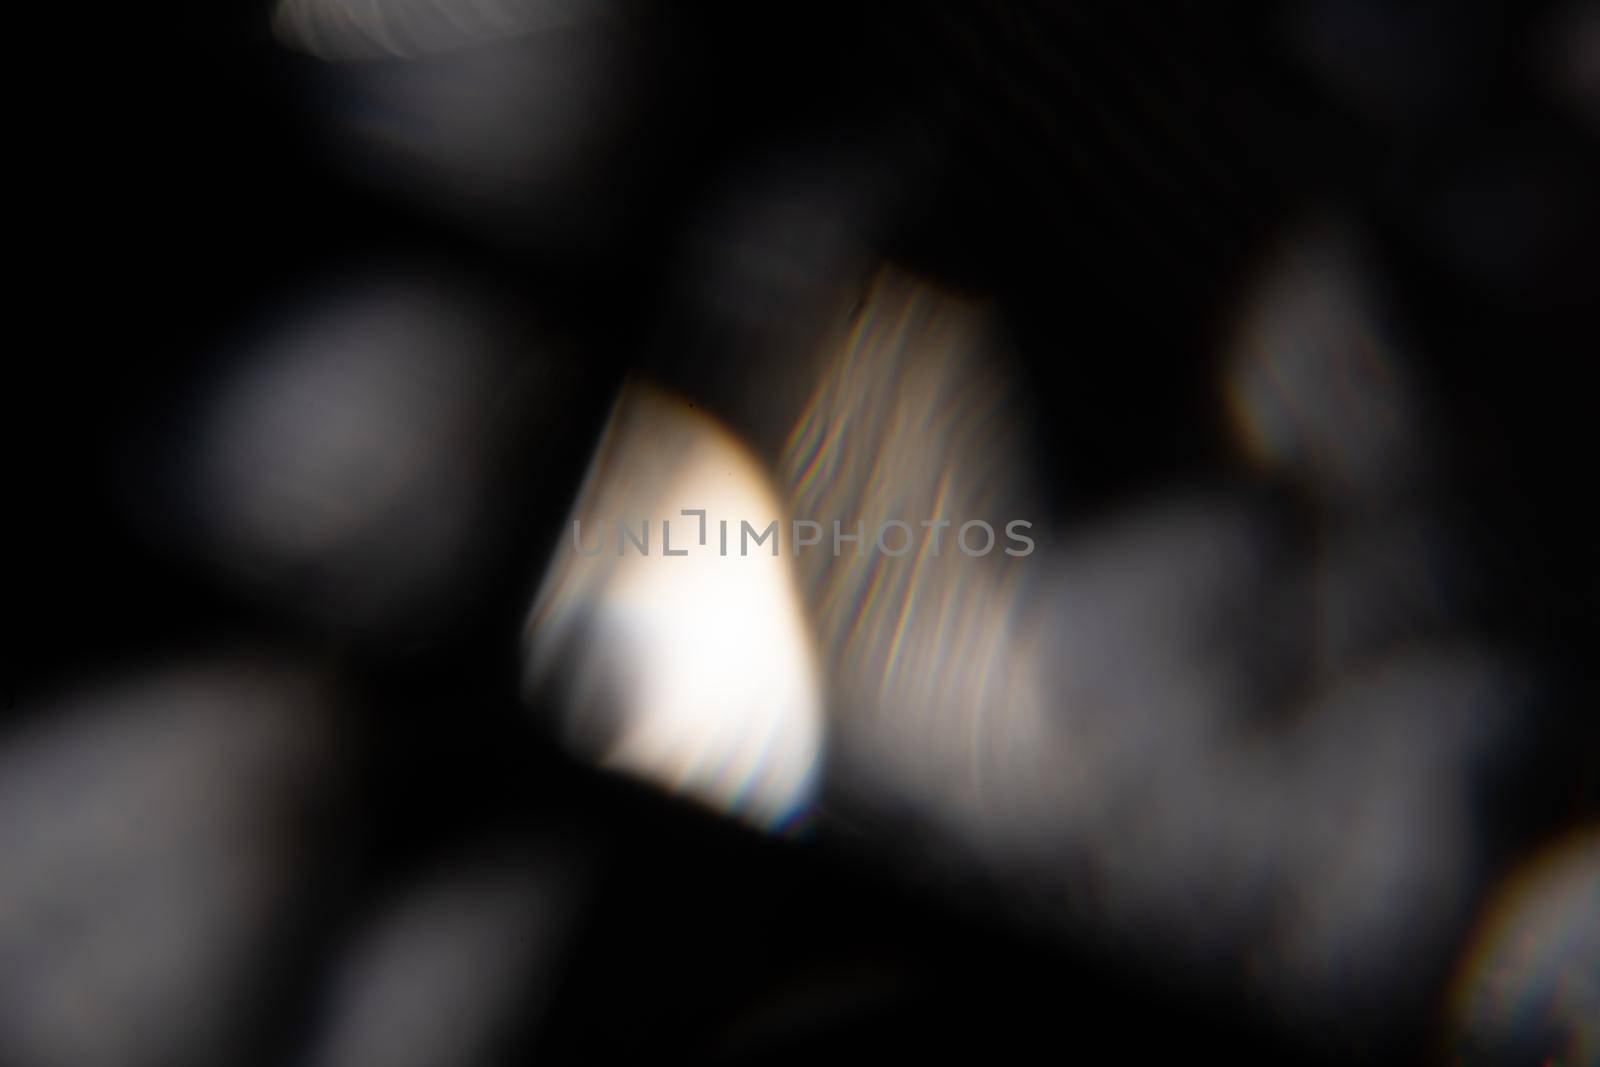 Blue light flare prism rainbow flares overlay effect on black background, light crossing crystals, prismatic sun catcher reflections rays. Abstract blurred colourful lens flare bokeh on dark backdrop